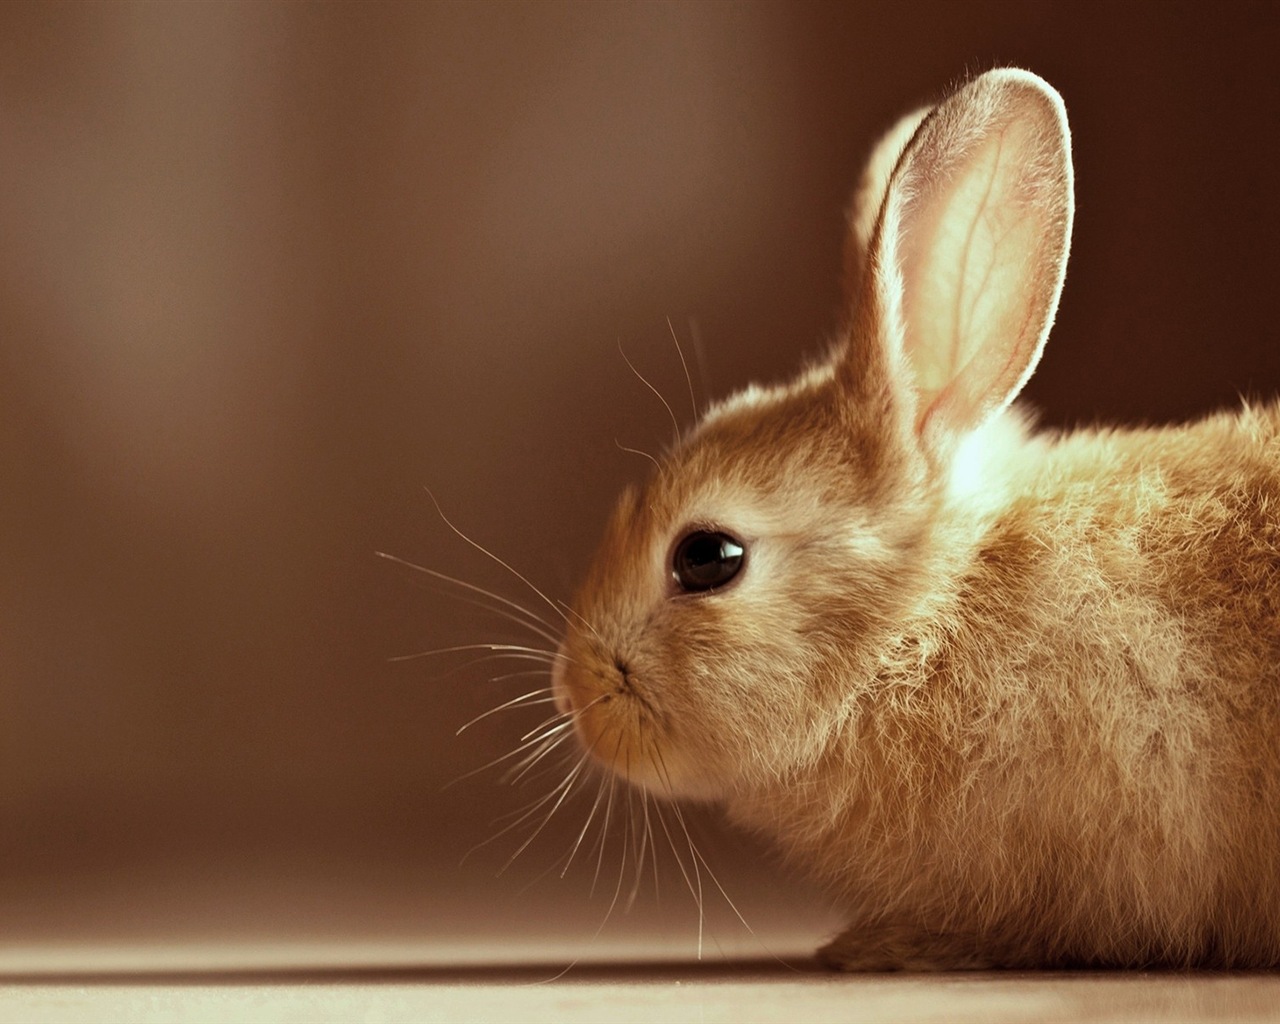 Furry animals, cute bunny HD wallpapers #19 - 1280x1024